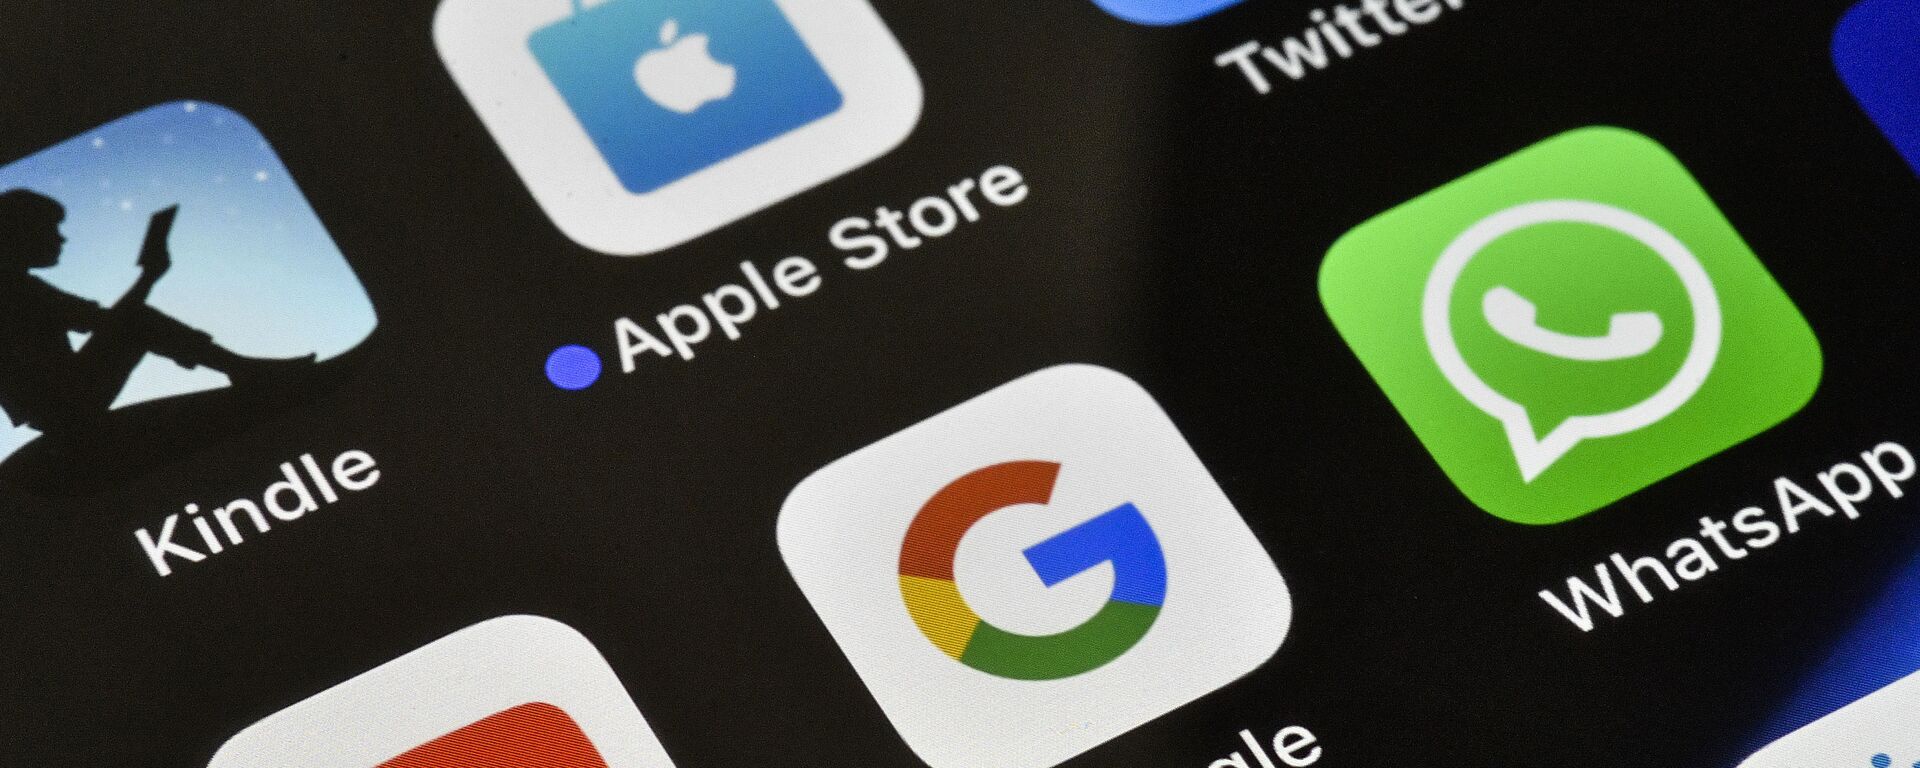 The icons of Google, WhatsApp and YouTube are pictured on an iPhone on Thursday, Nov. 15, 2018 in Gelsenkirchen, Germany - Sputnik International, 1920, 22.02.2021